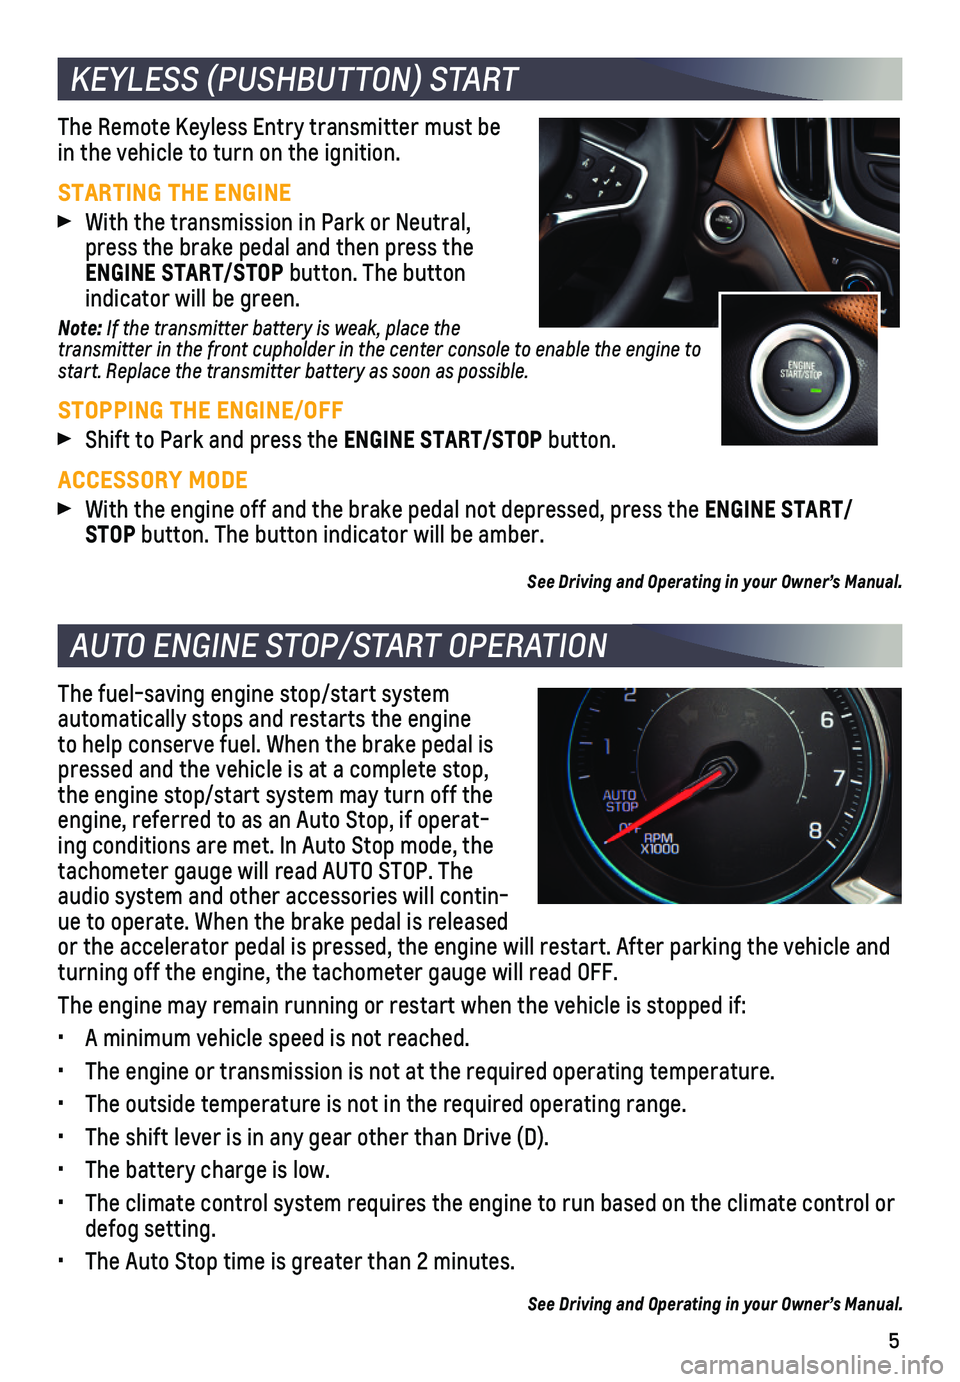 CHEVROLET EQUINOX 2018  Get To Know Guide 5
The Remote Keyless Entry transmitter must be in the vehicle to turn on the ignition.
STARTING THE ENGINE With the transmission in Park or Neutral, press the brake pedal and then press the ENGINE STA